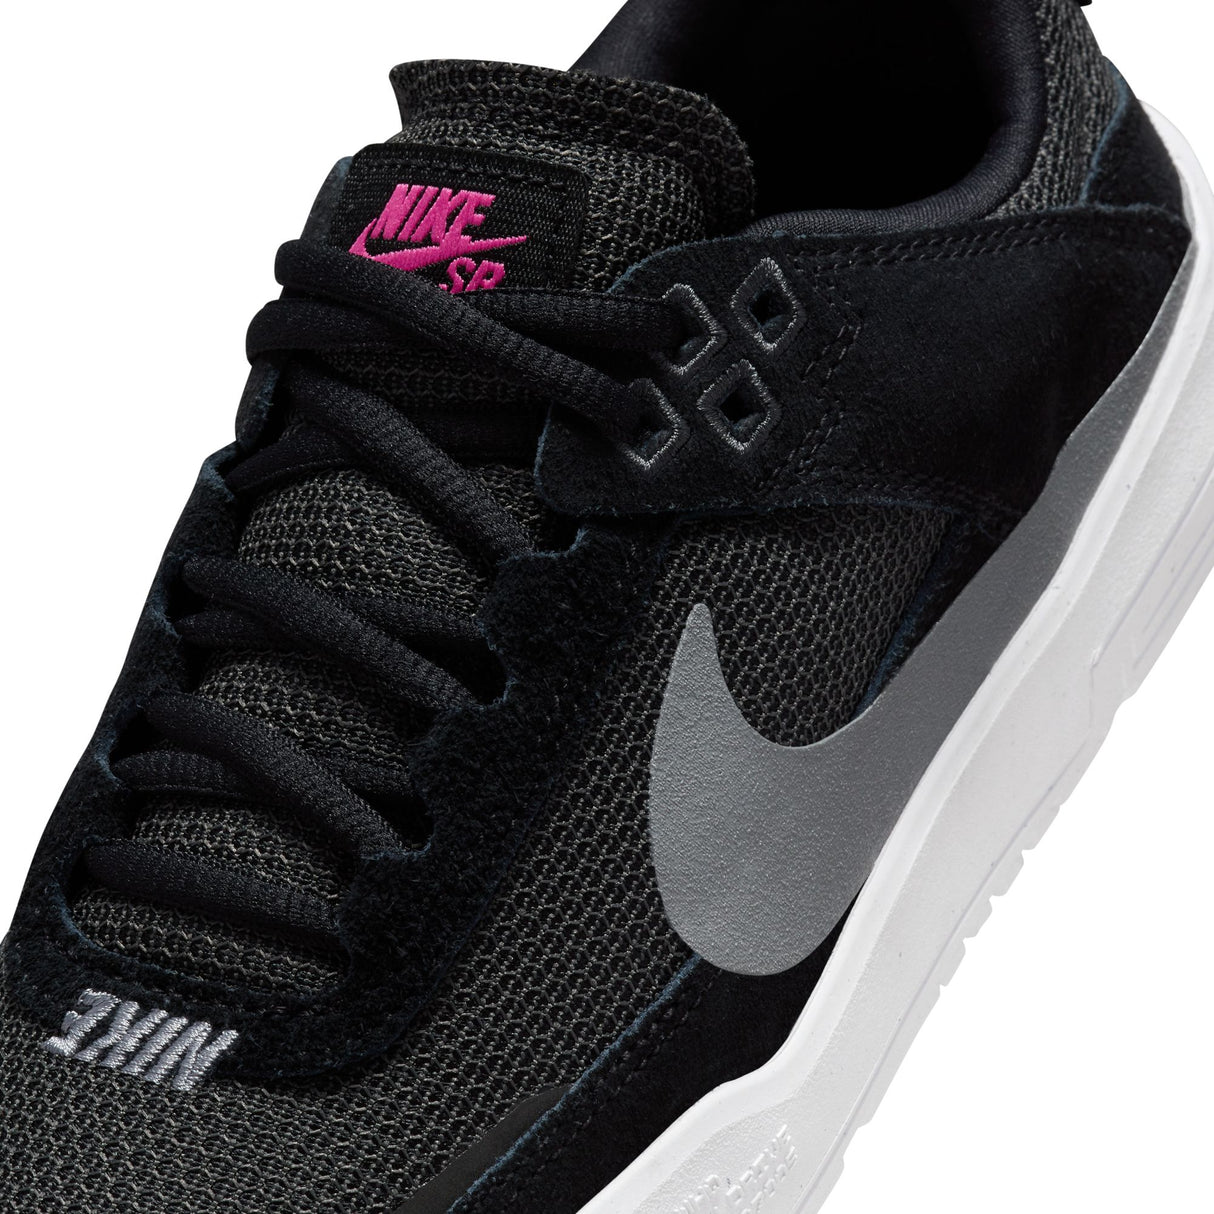 Nike SB Day One Black/Cool Grey Anthracite Youth Shoes